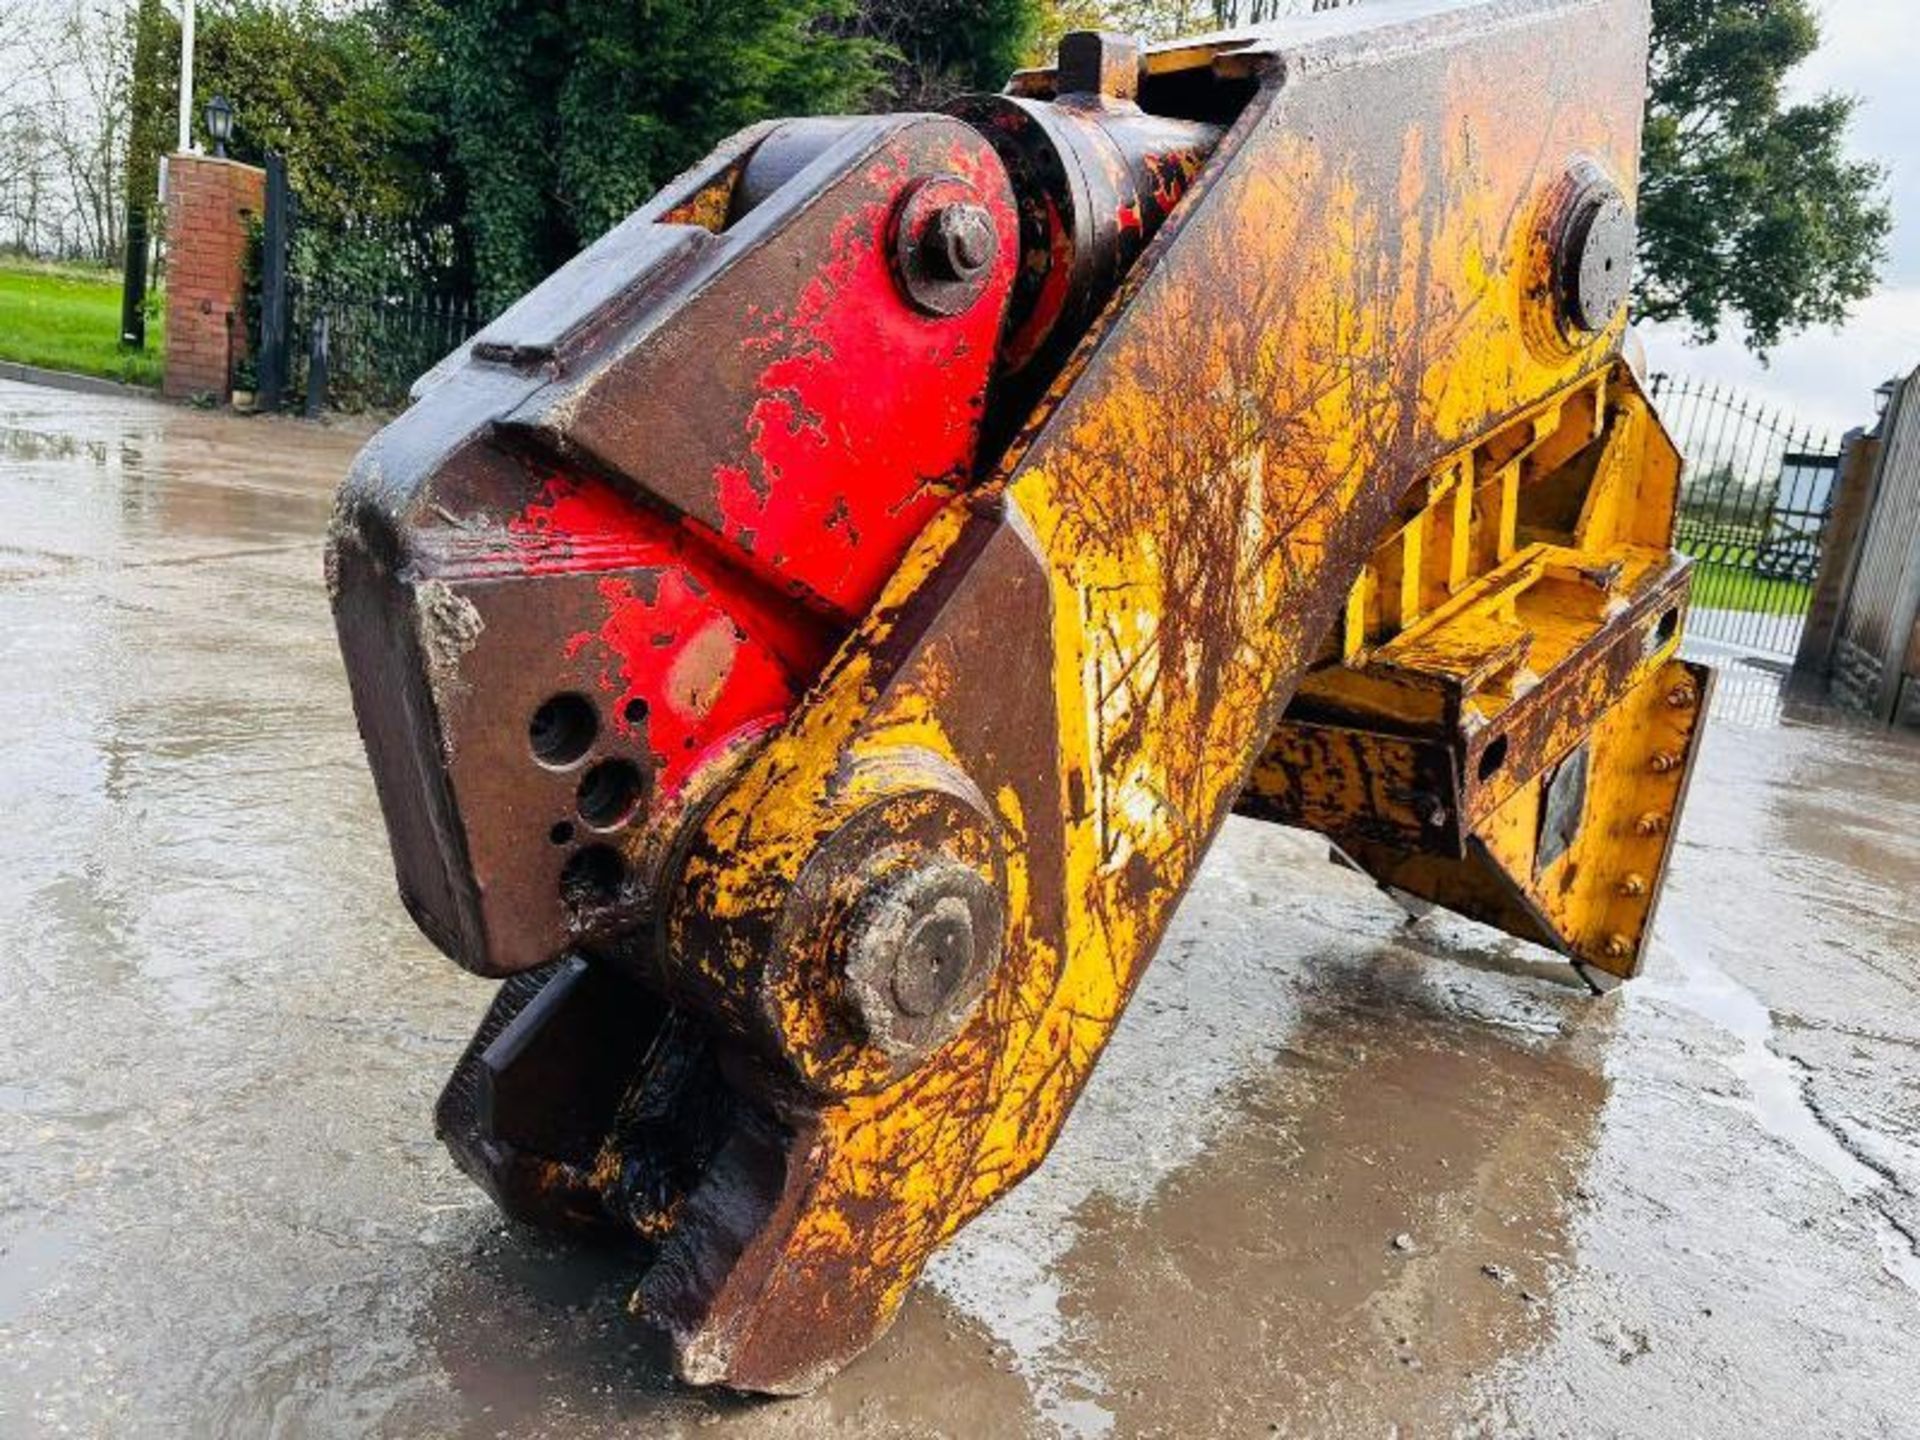 HYDRAULIC DEMOLITION SHEAR TO SUIT 10-12 TON EXCAVATOR - Image 5 of 11